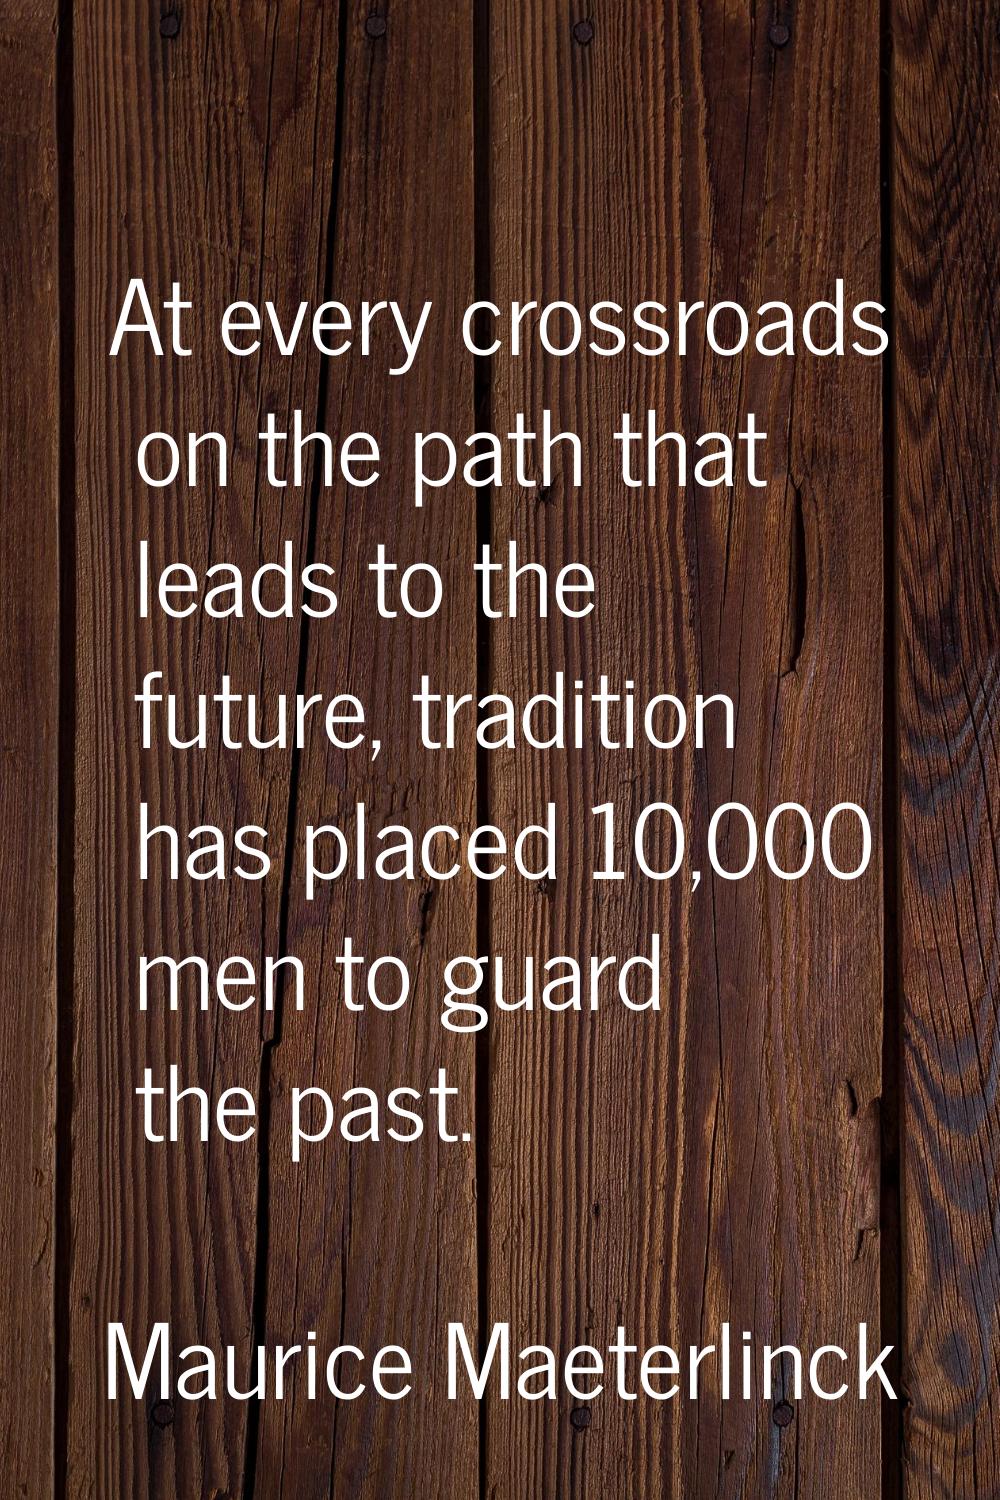 At every crossroads on the path that leads to the future, tradition has placed 10,000 men to guard 